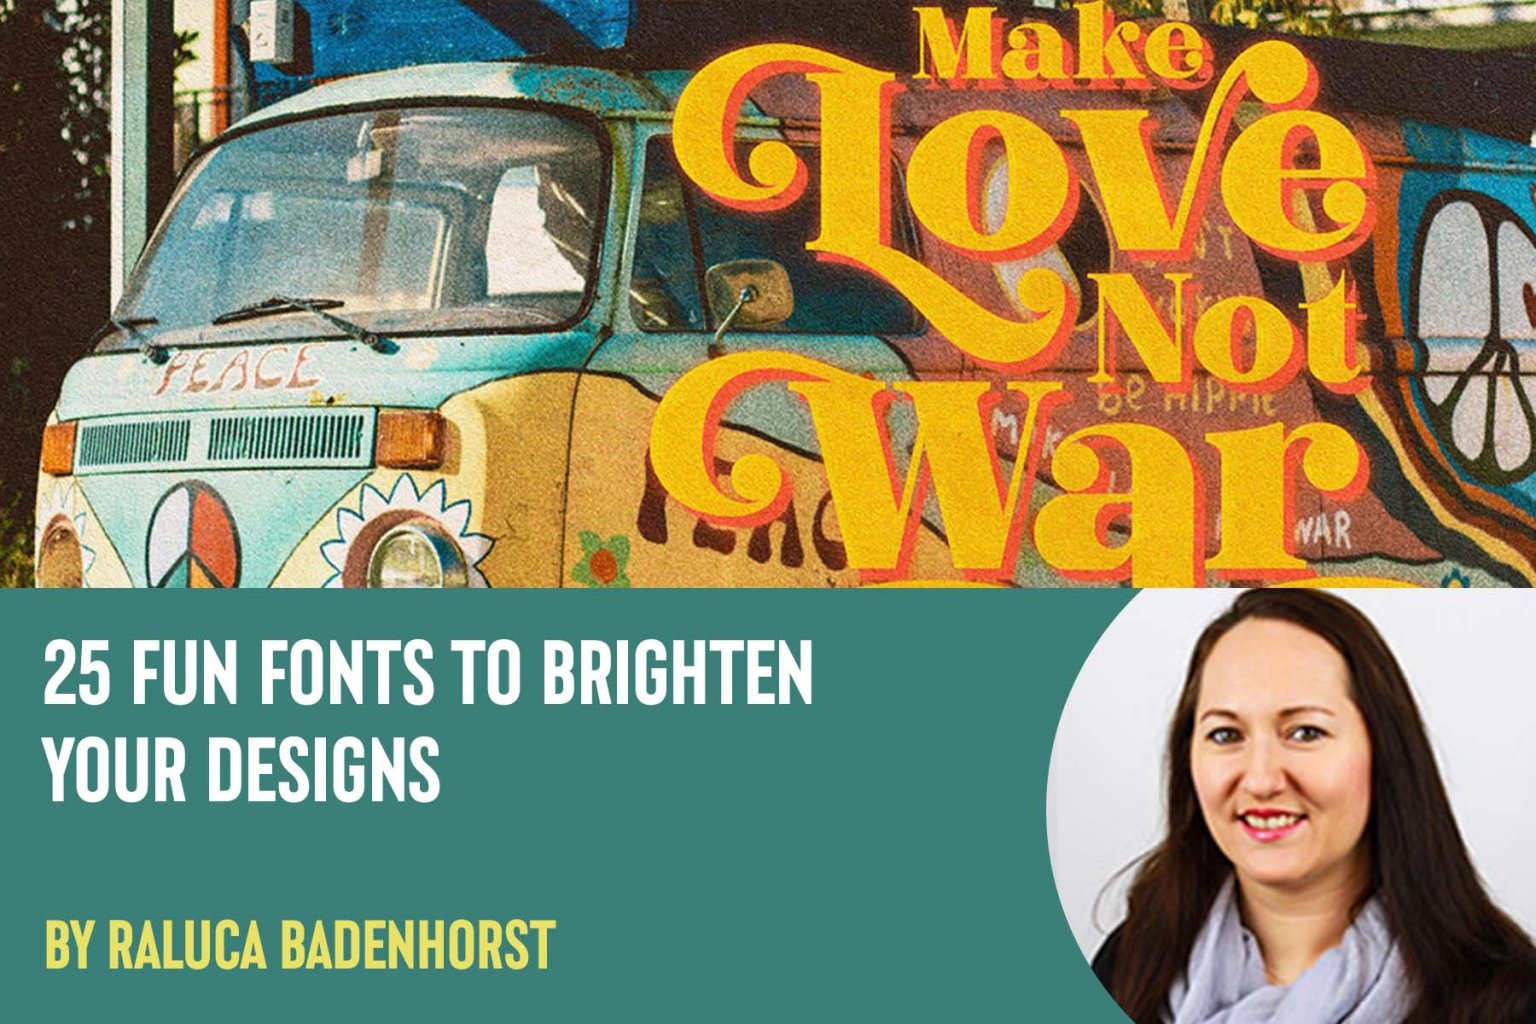 25 Fun Fonts to Brighten your Designs